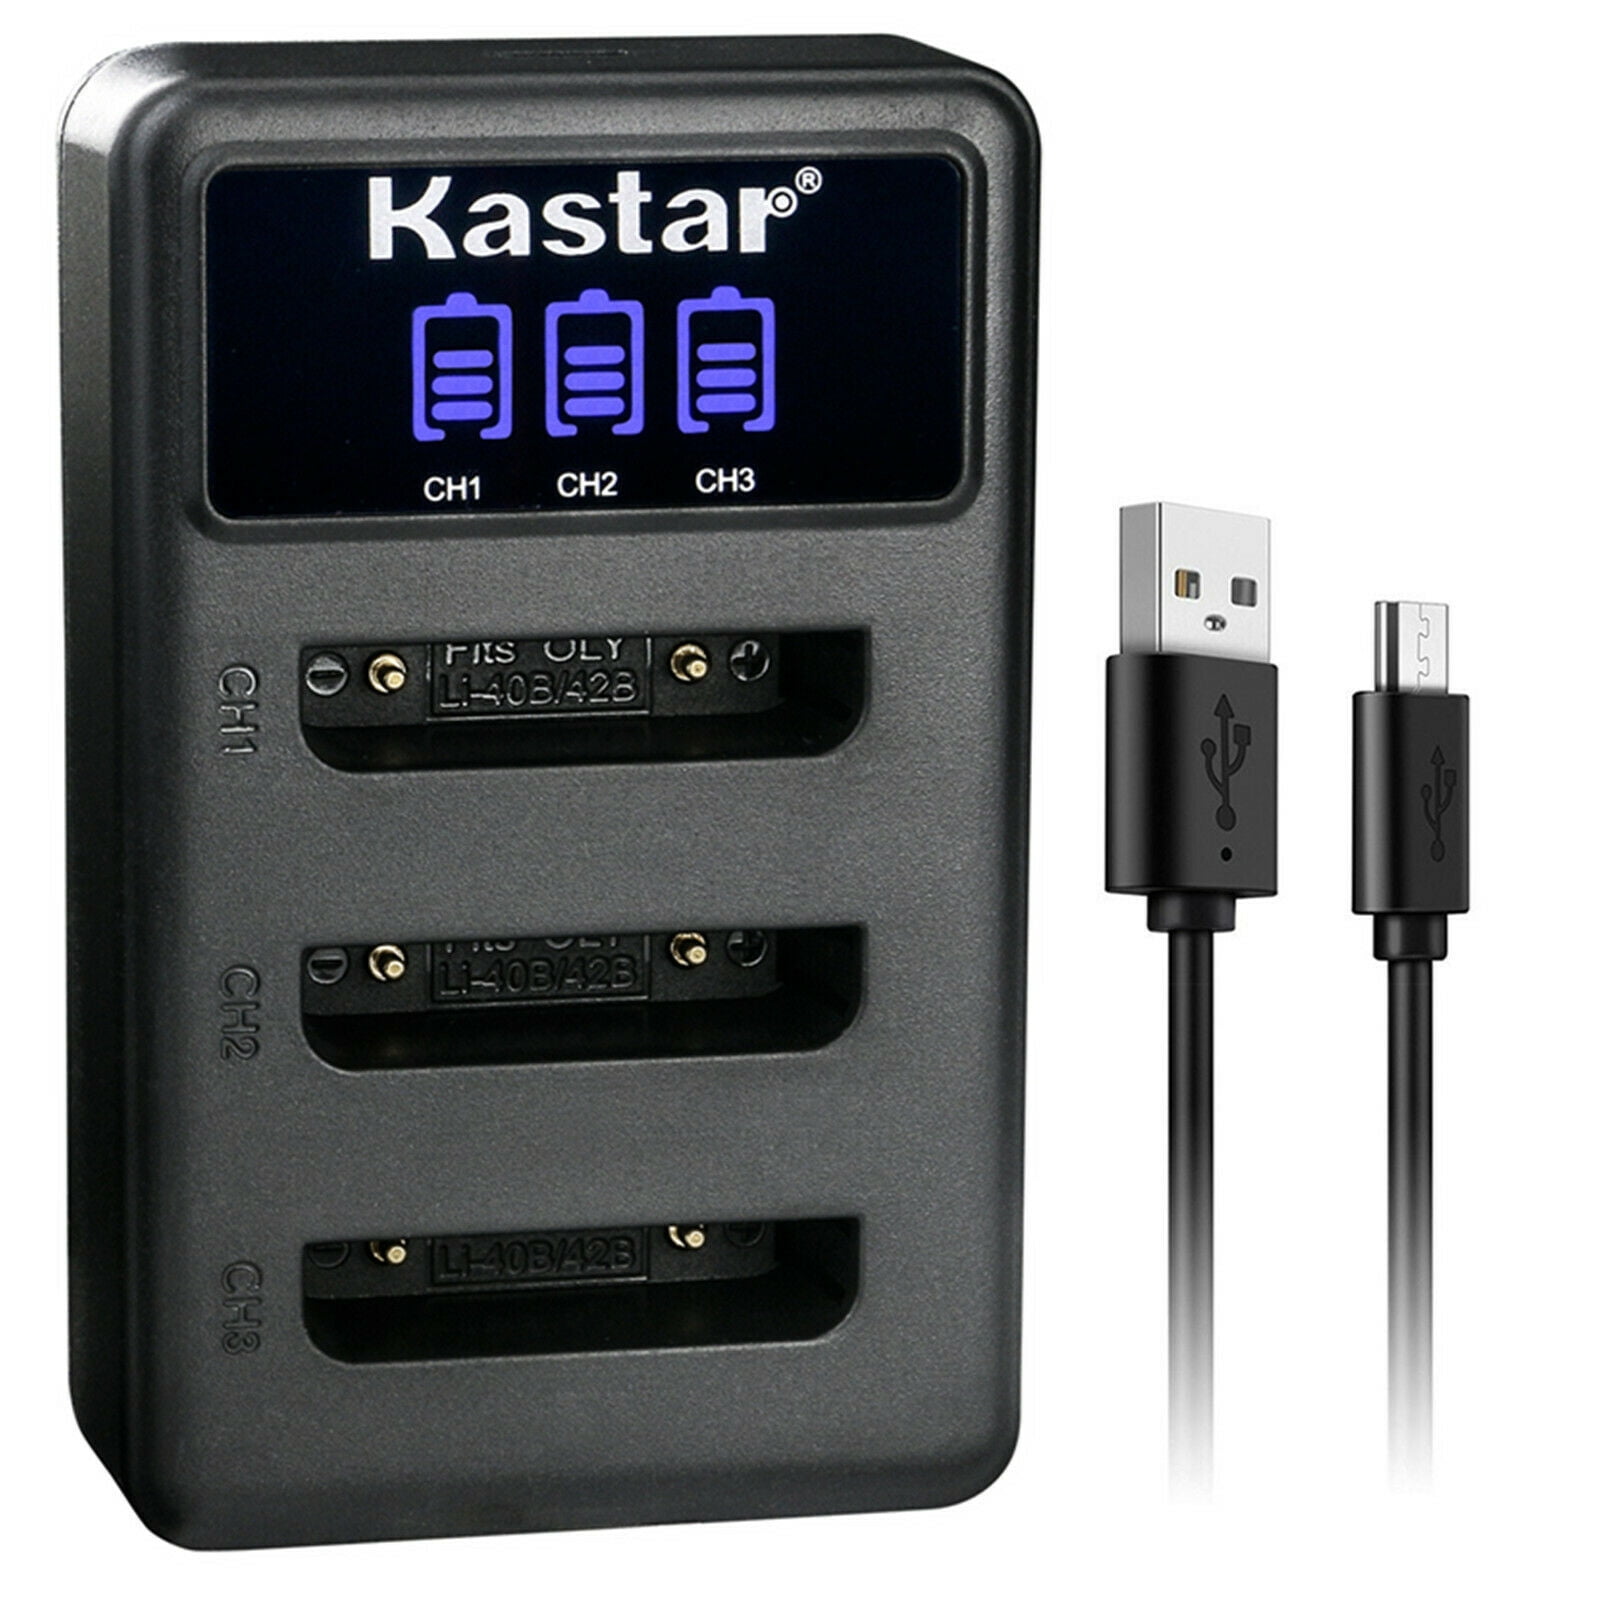 G5WP J1250 J1455 Q1455 E1055W E1486TW E1410SW Kastar 2 Pack Battery and LCD Triple USB Charger Compatible with GE E1045W E1255W G3WP E1276W E1450W E1680W J1050 E1480W J1456W 